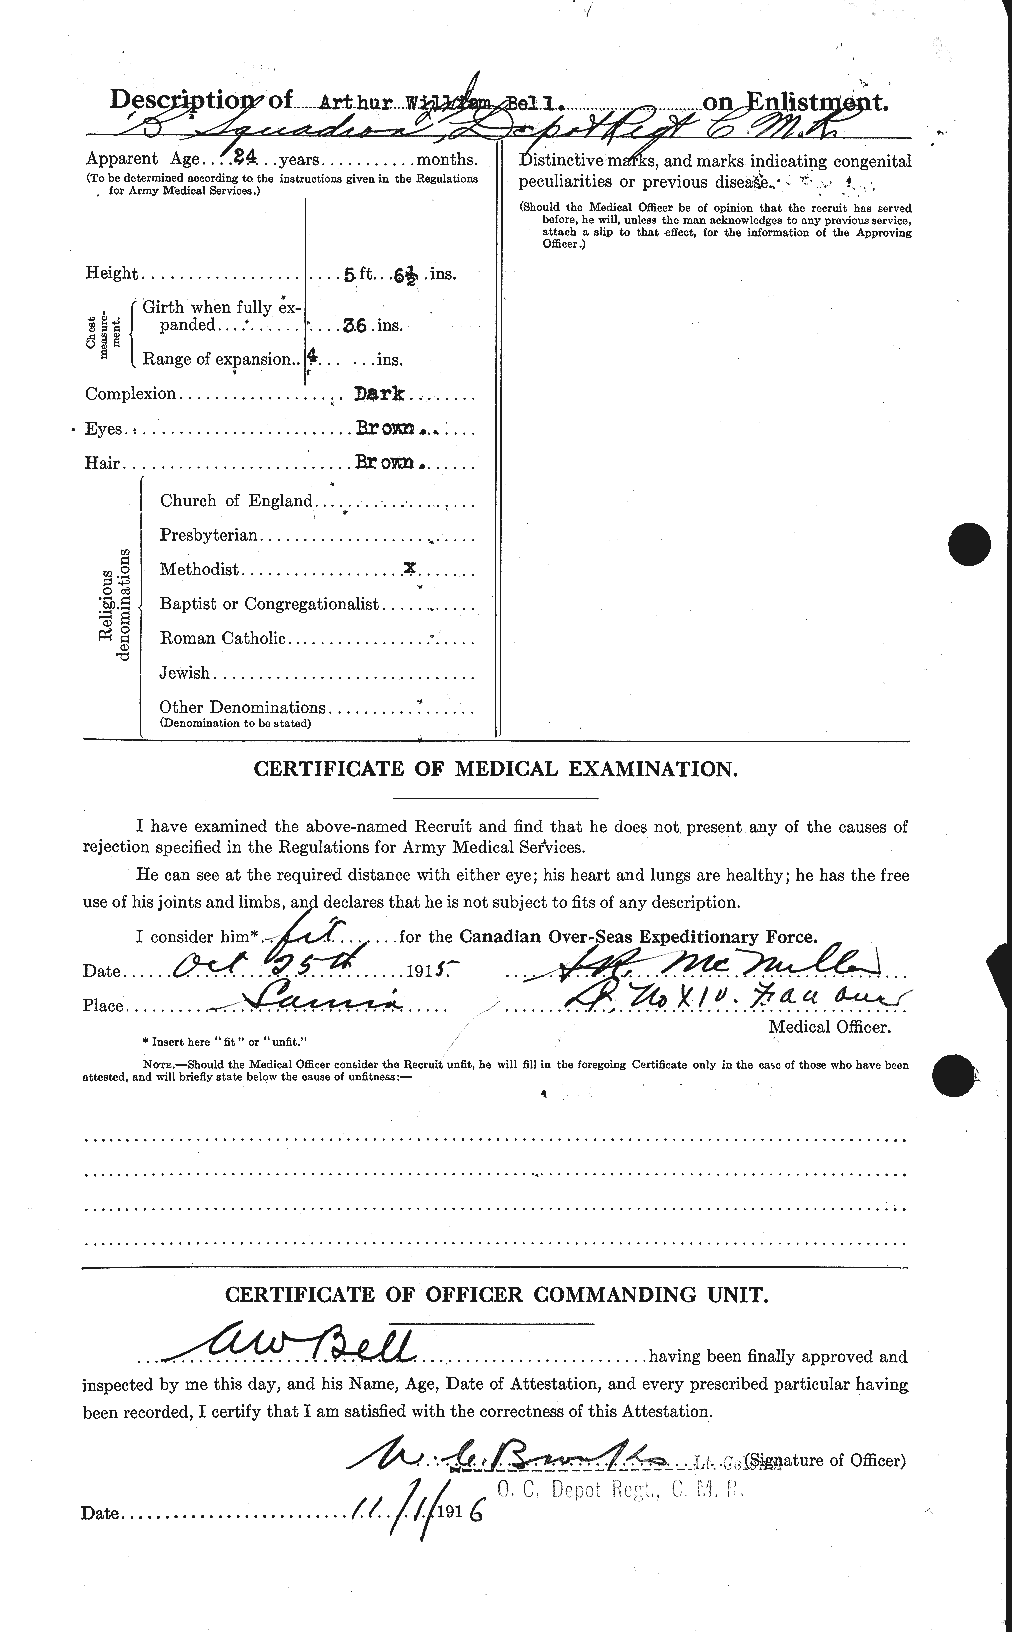 Personnel Records of the First World War - CEF 233898b